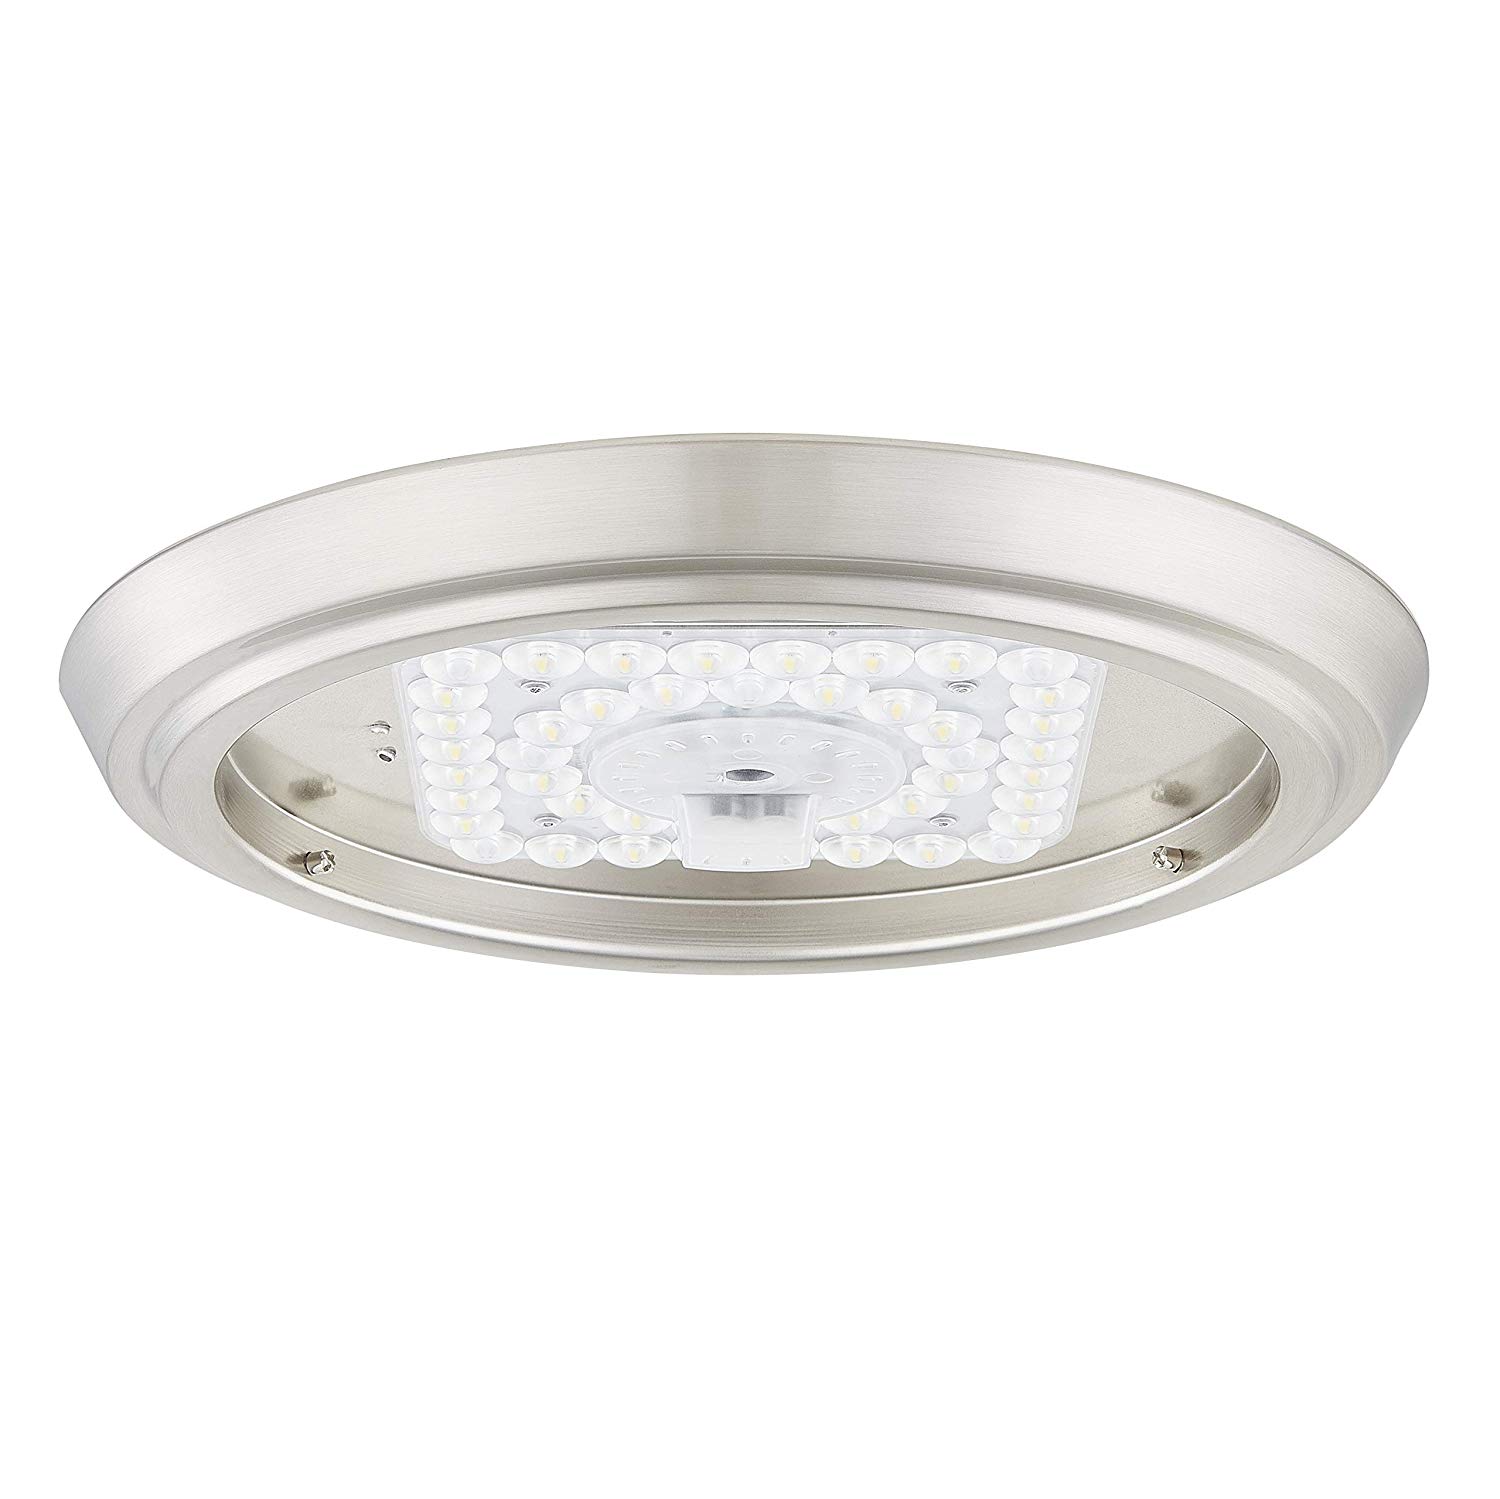 GRUENLICH LED Flush Mount Ceiling Lighting Fixture, 11 Inch Dimmable 19W (125W Replacement) 1200 Lumen, Metal Housing with Nickel Finish, ETL and Damp Location Rated, 2-Pack